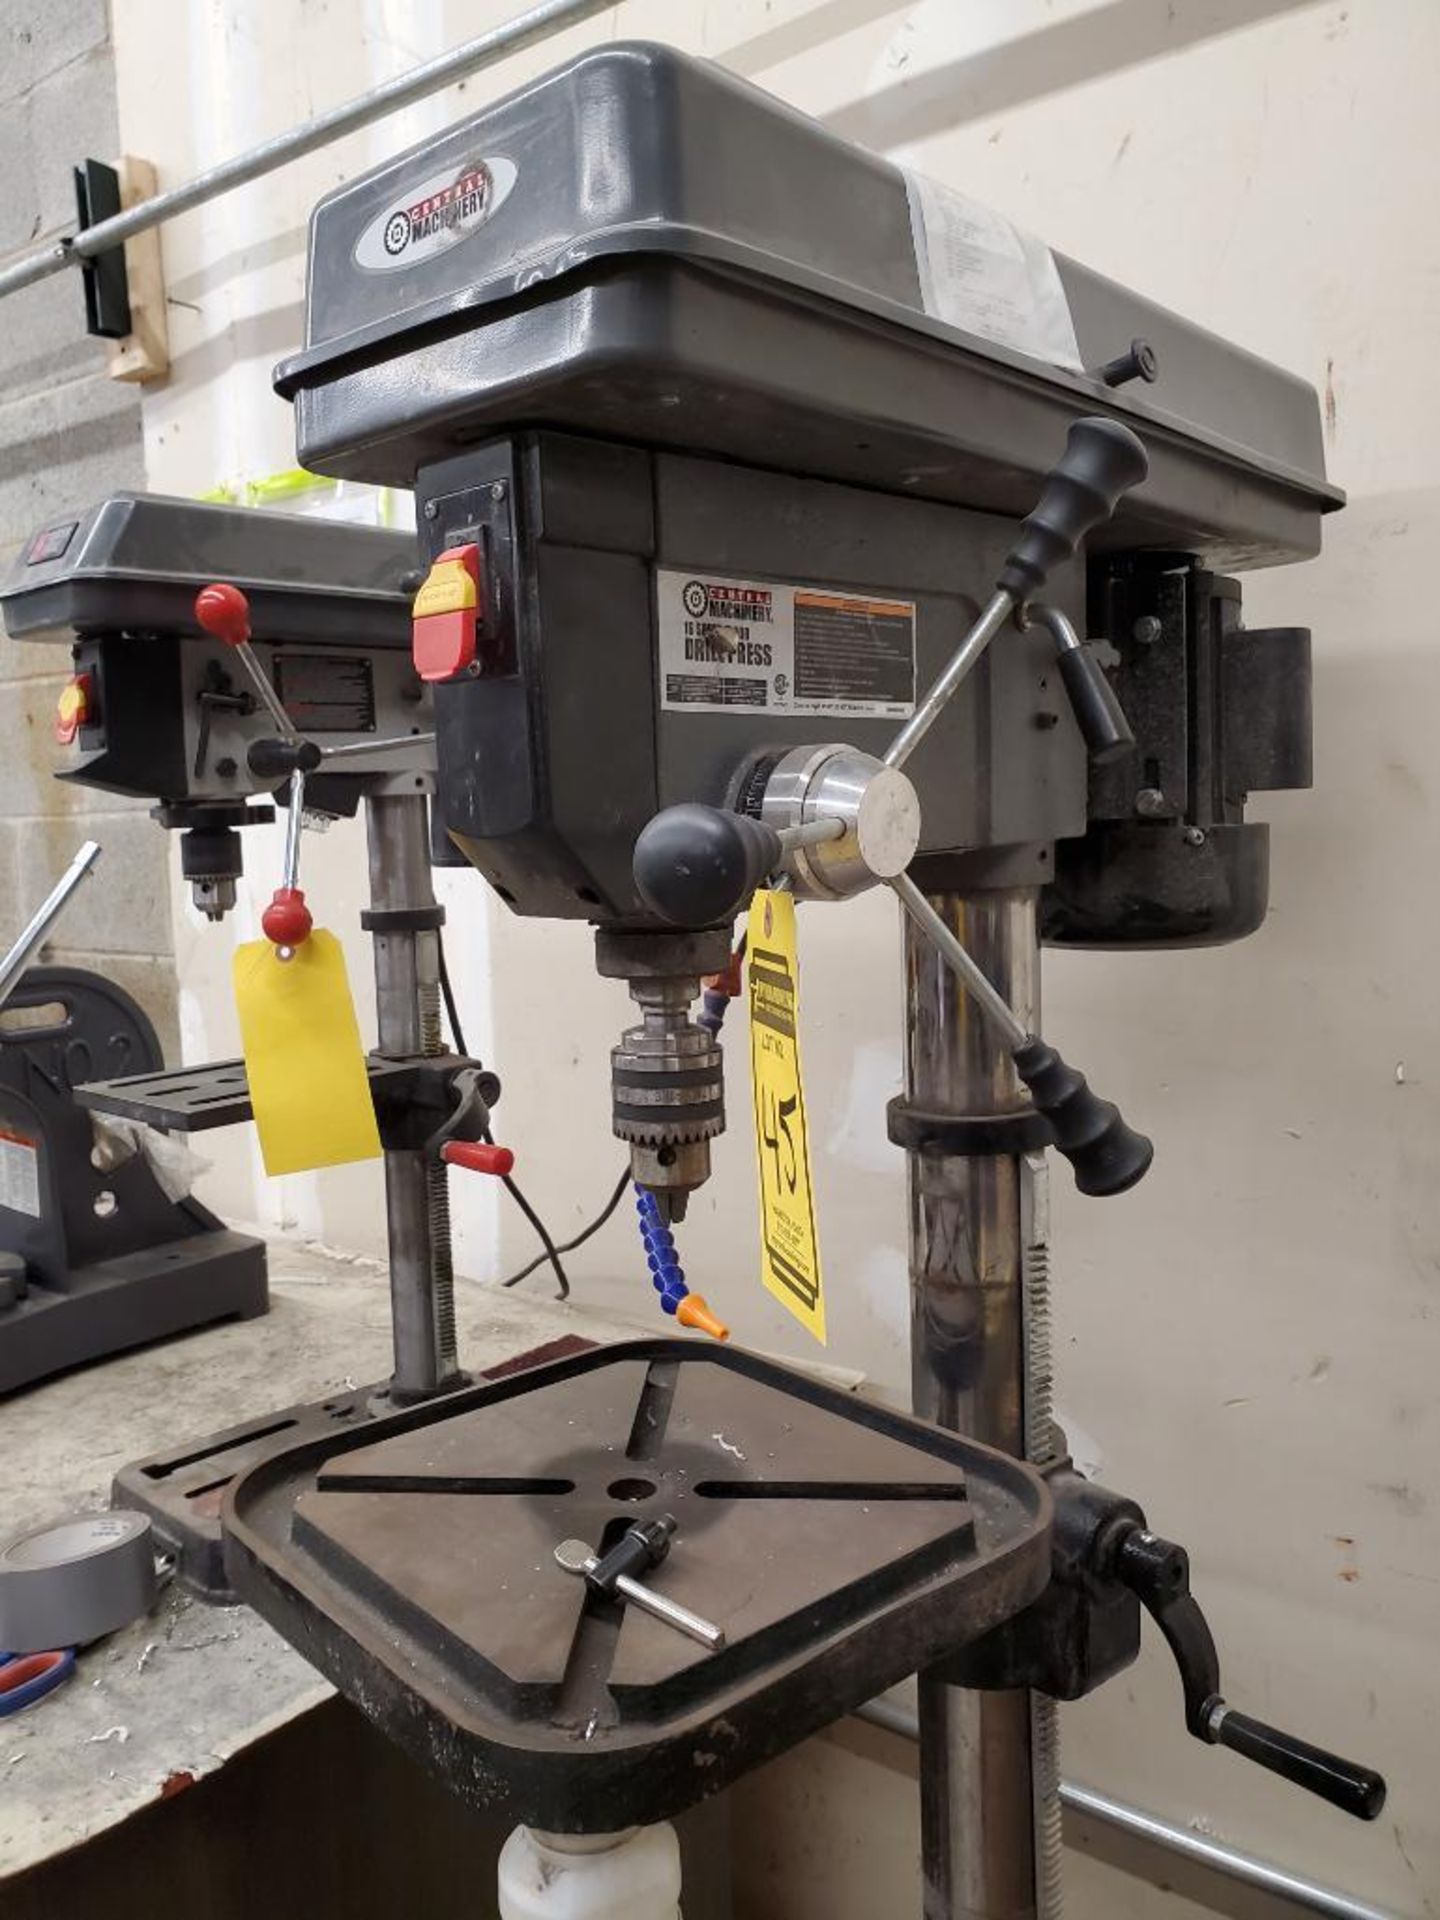 Central Machinery 16-Speed Vertical Drill Press, 220-3,600 RPM, 5/8" Chuck, Mt3 Spindle, 12-3/4" x 1 - Image 4 of 9